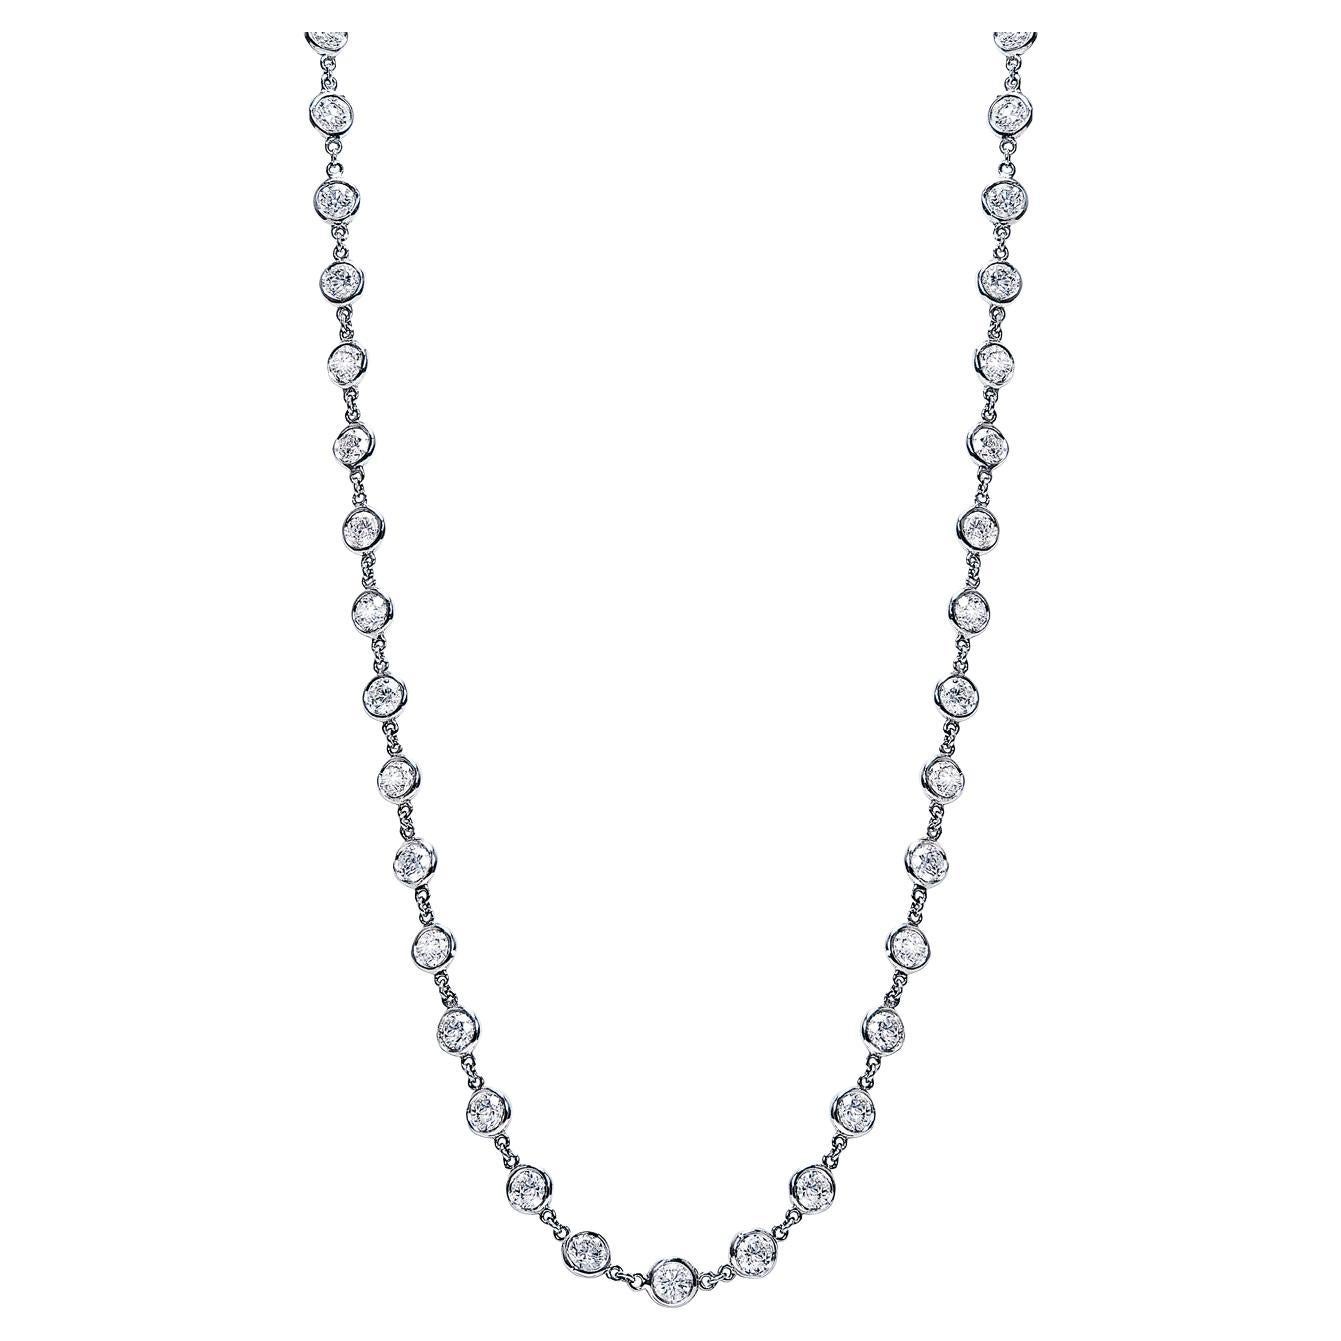 12 Carat Round Brilliant Diamonds By The Yard Necklace Certified For Sale